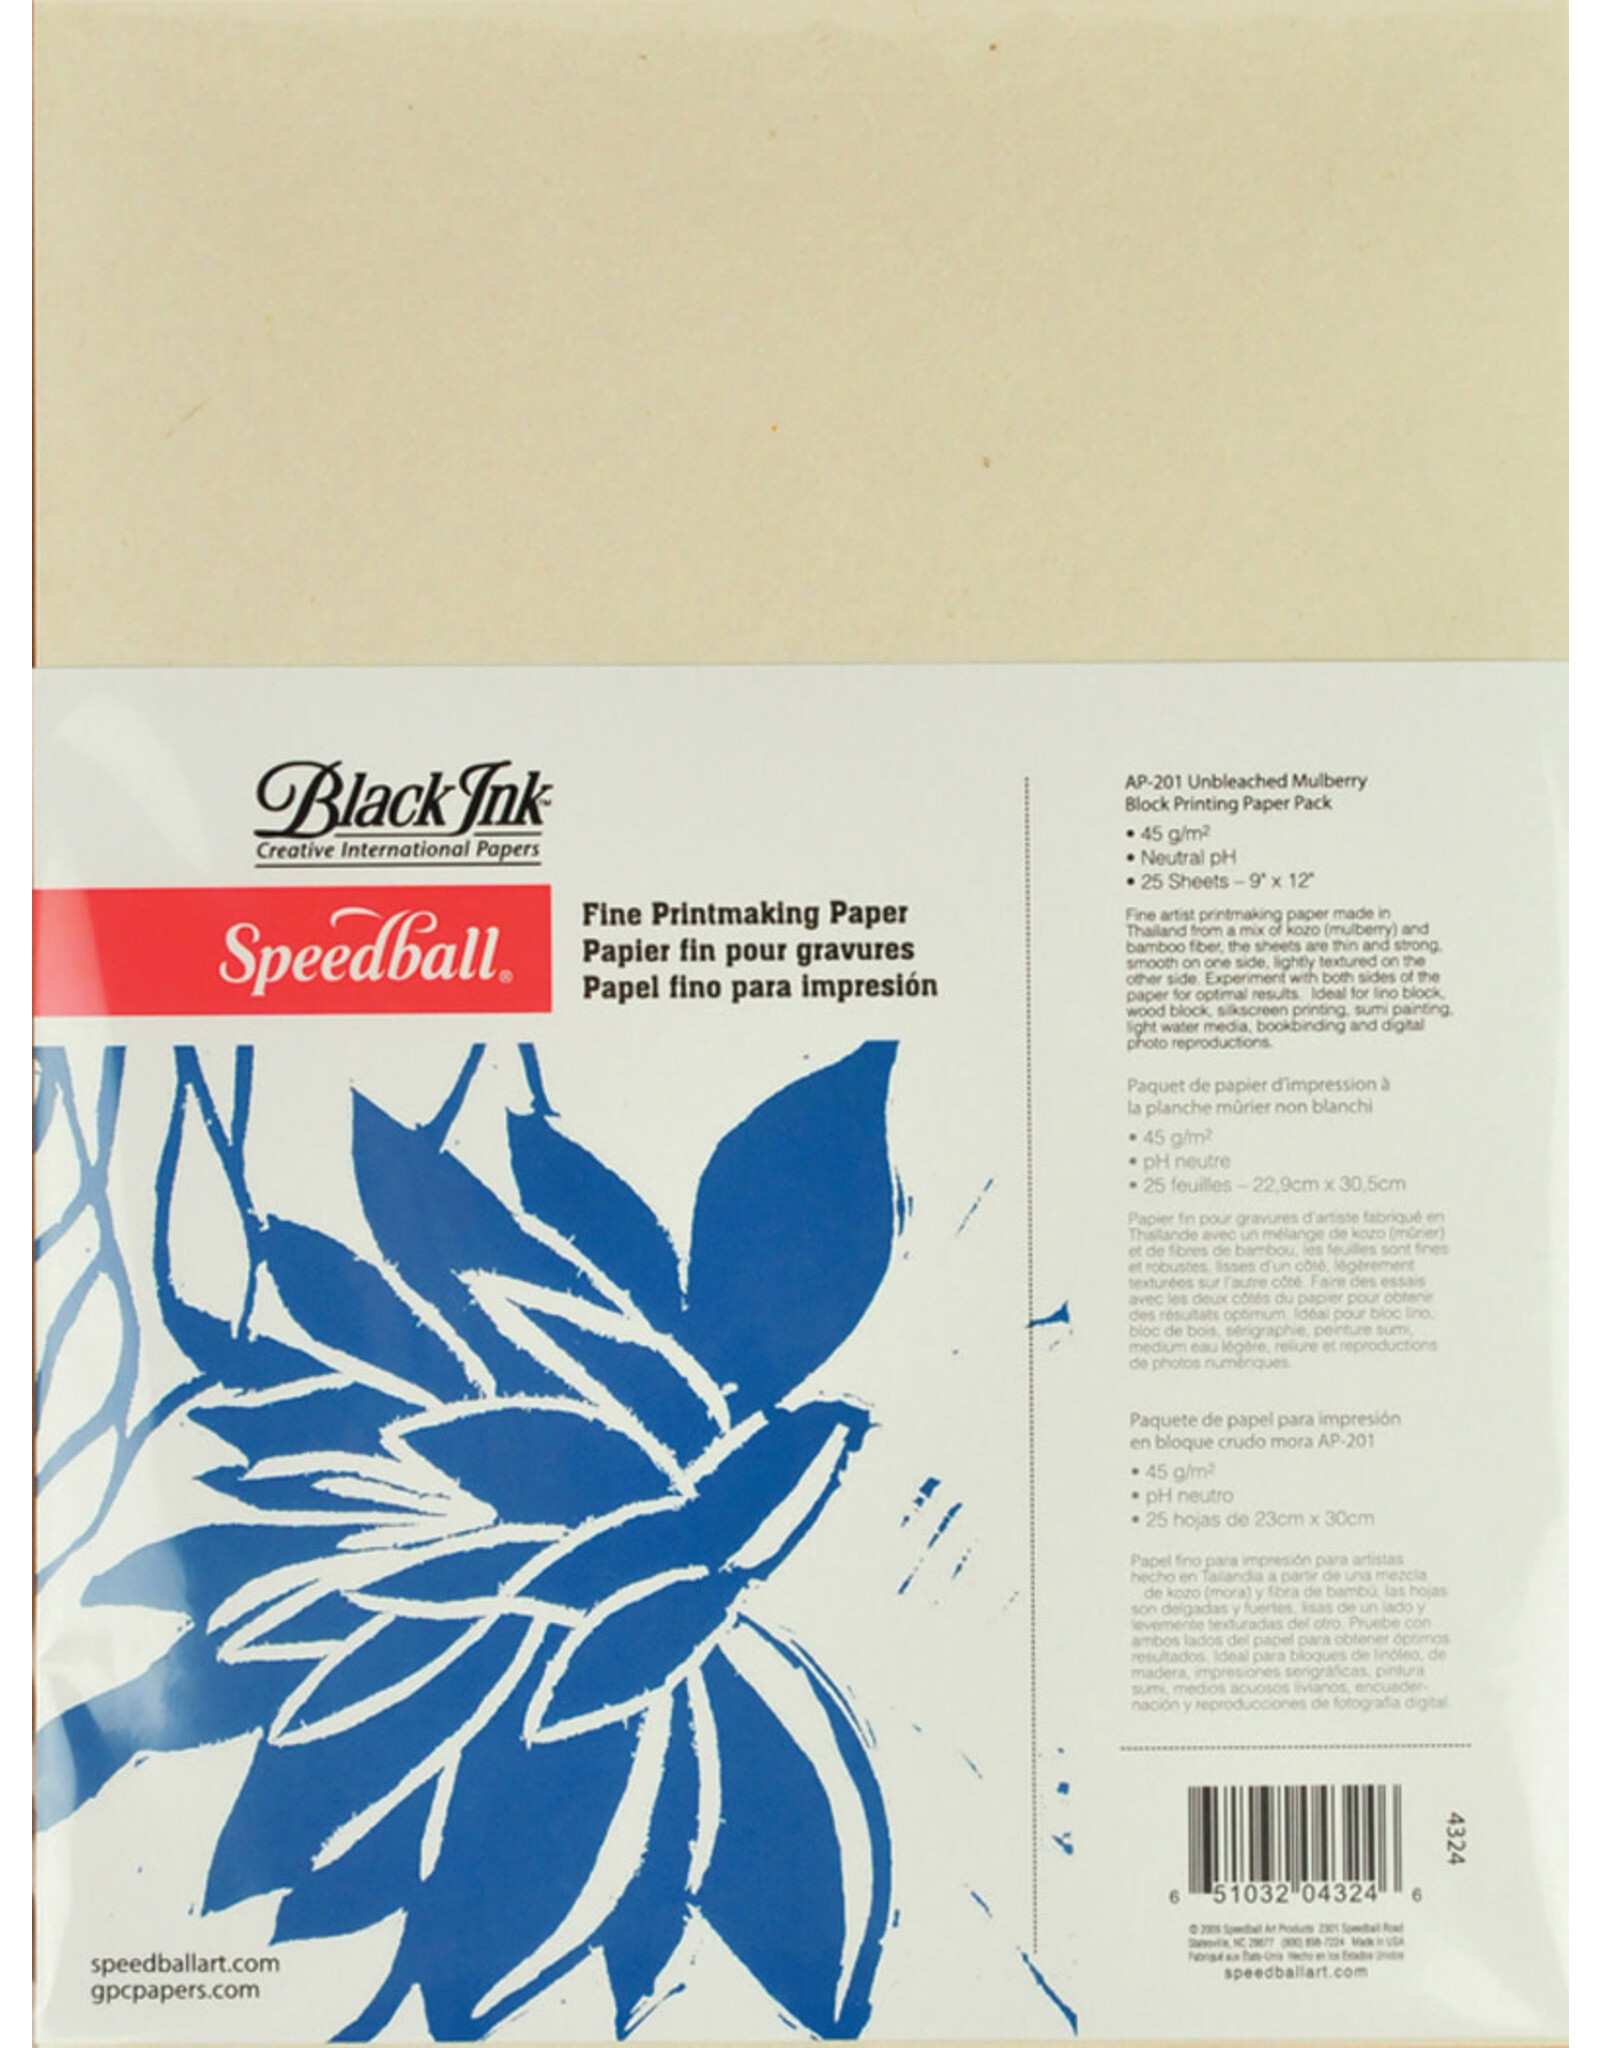 SPEEDBALL ART PRODUCTS Speedball Mulberry Paper Fine Printmaking Paper, Natural, 25 sheets, 9" x 12"